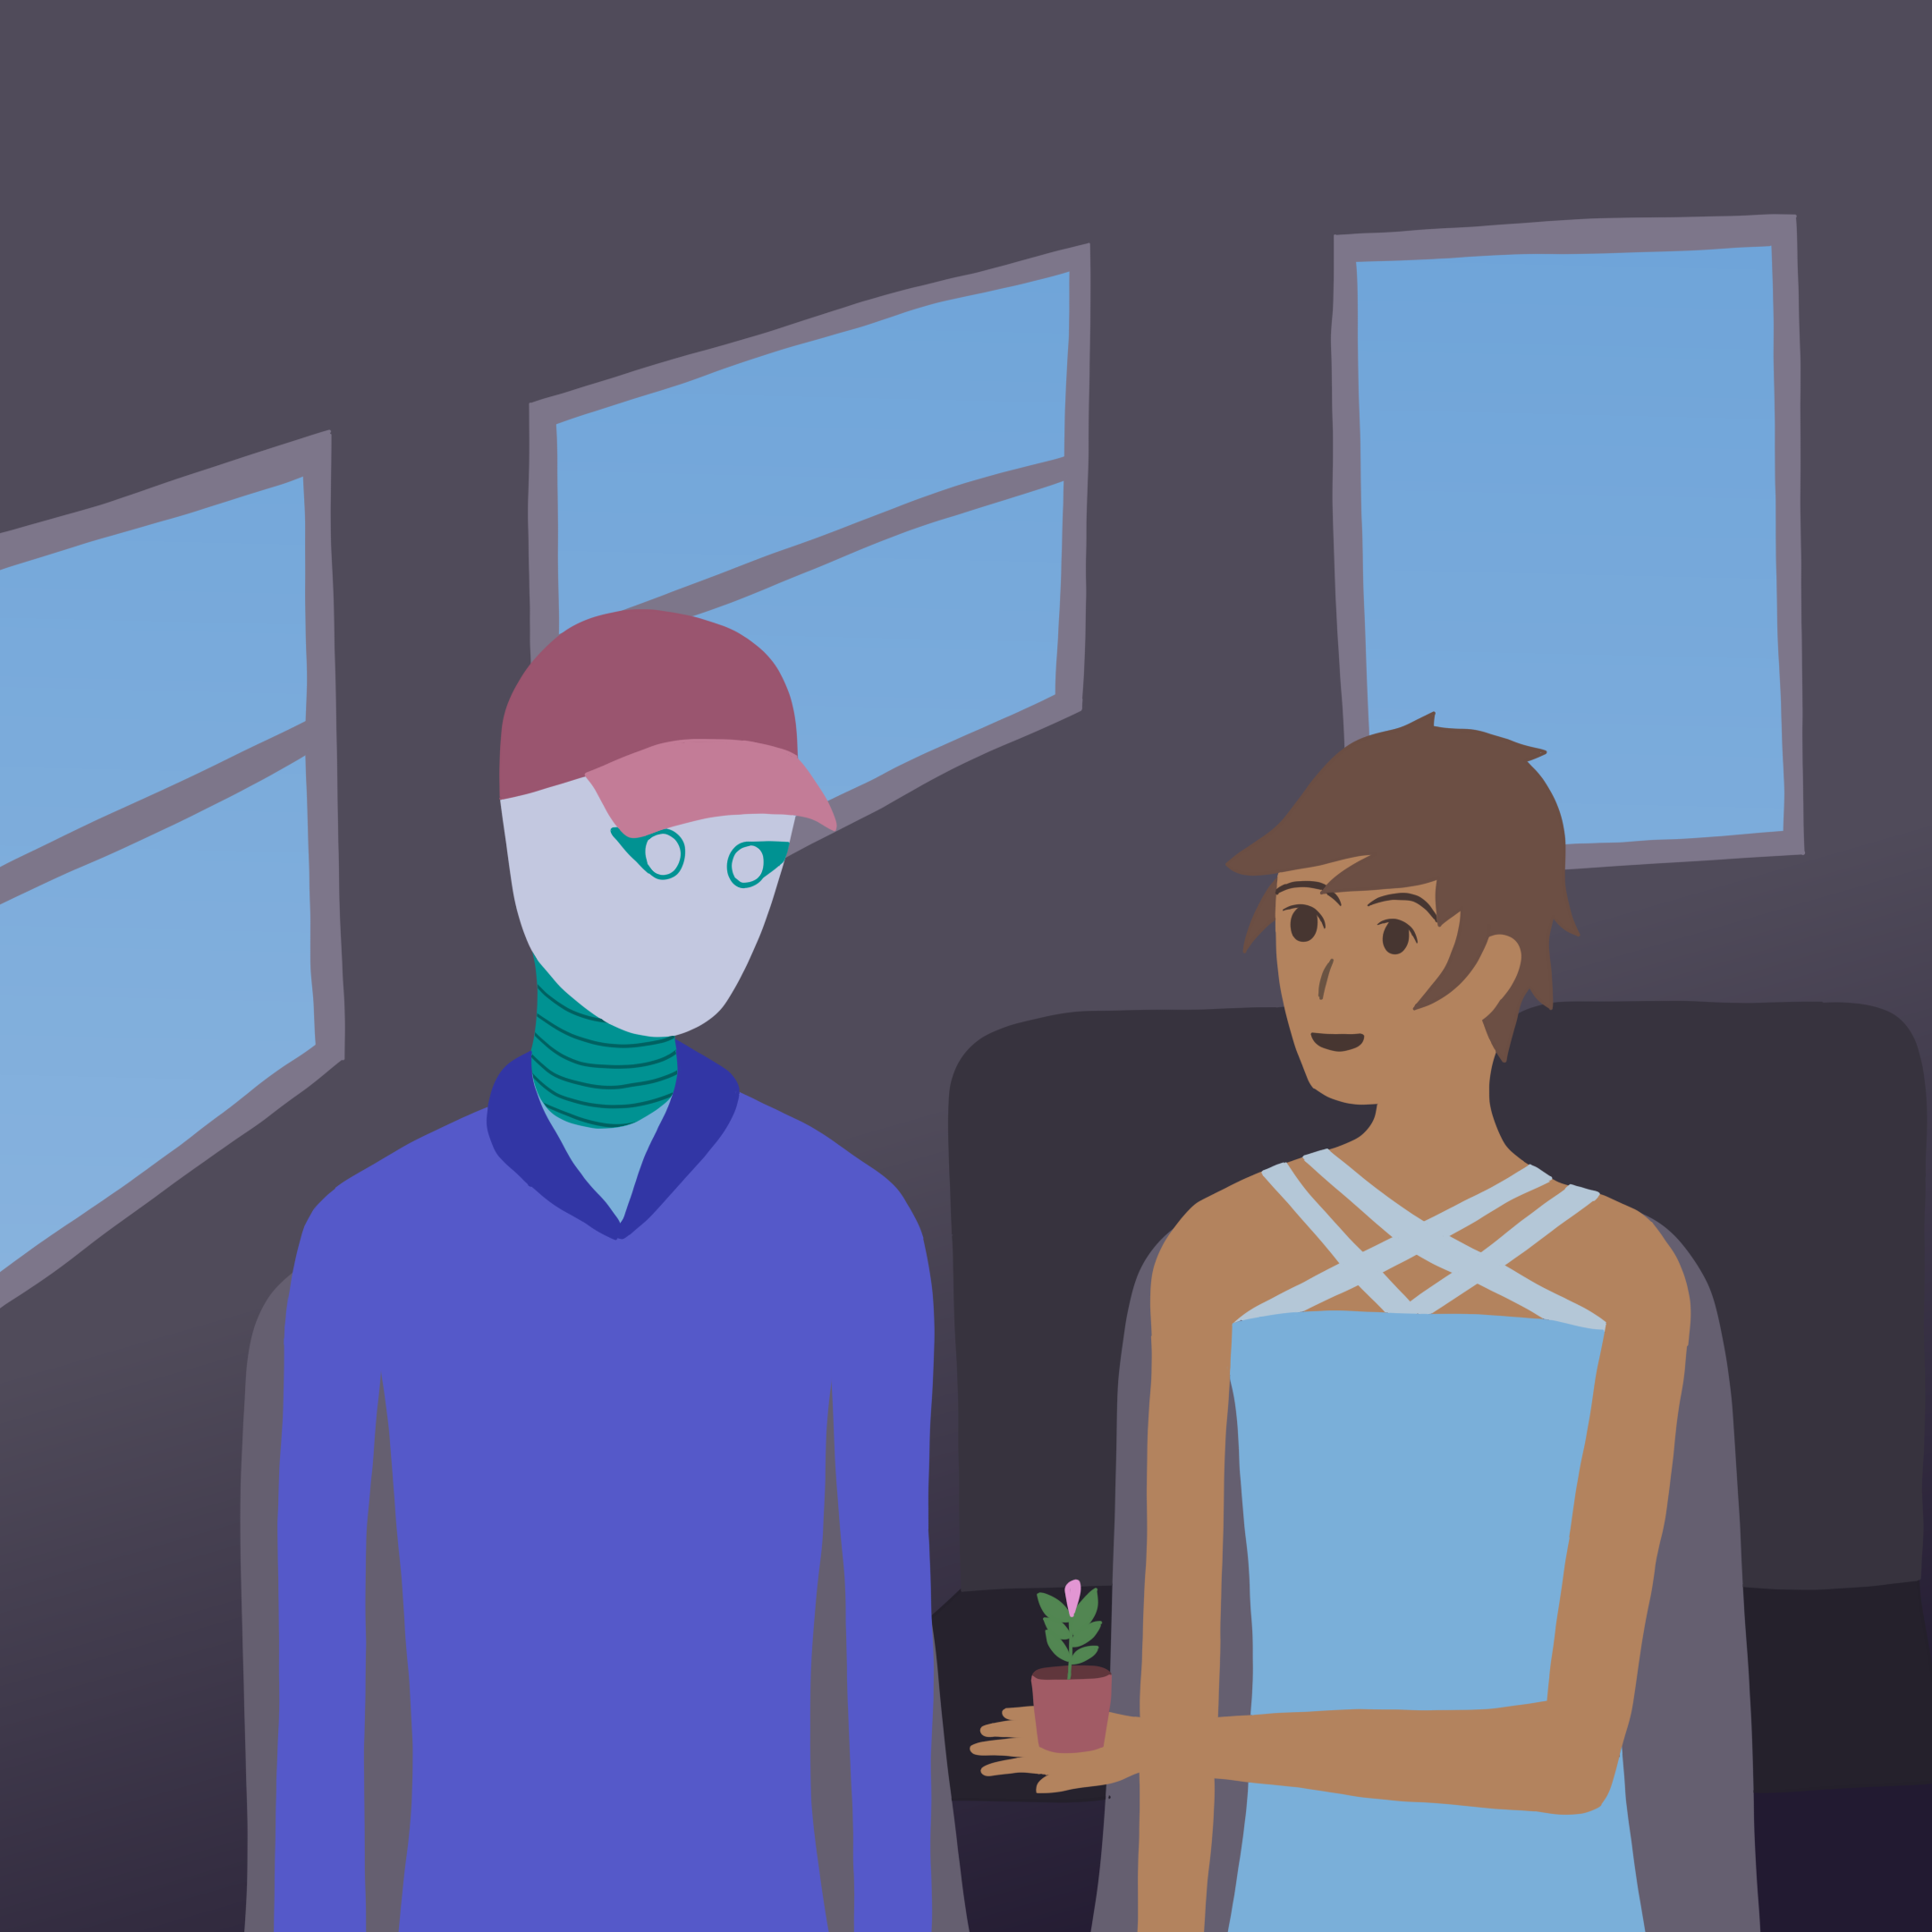 A robot named Rova and a human named Evi sitting on the bus together. Evi is giving Rova a small potted plant.